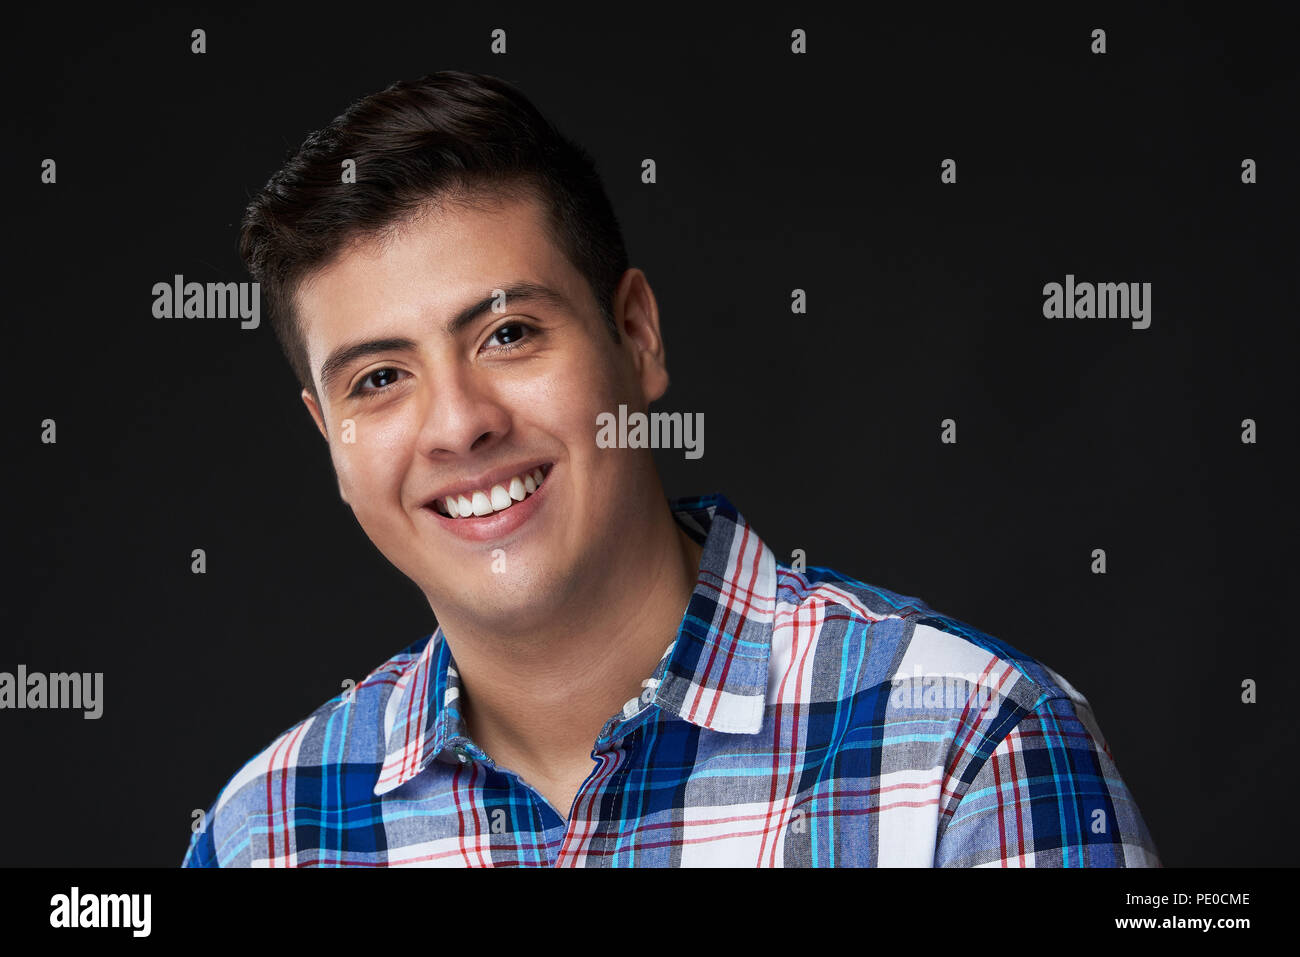 Happy young smiling latin man portrait in casual outfit Stock Photo